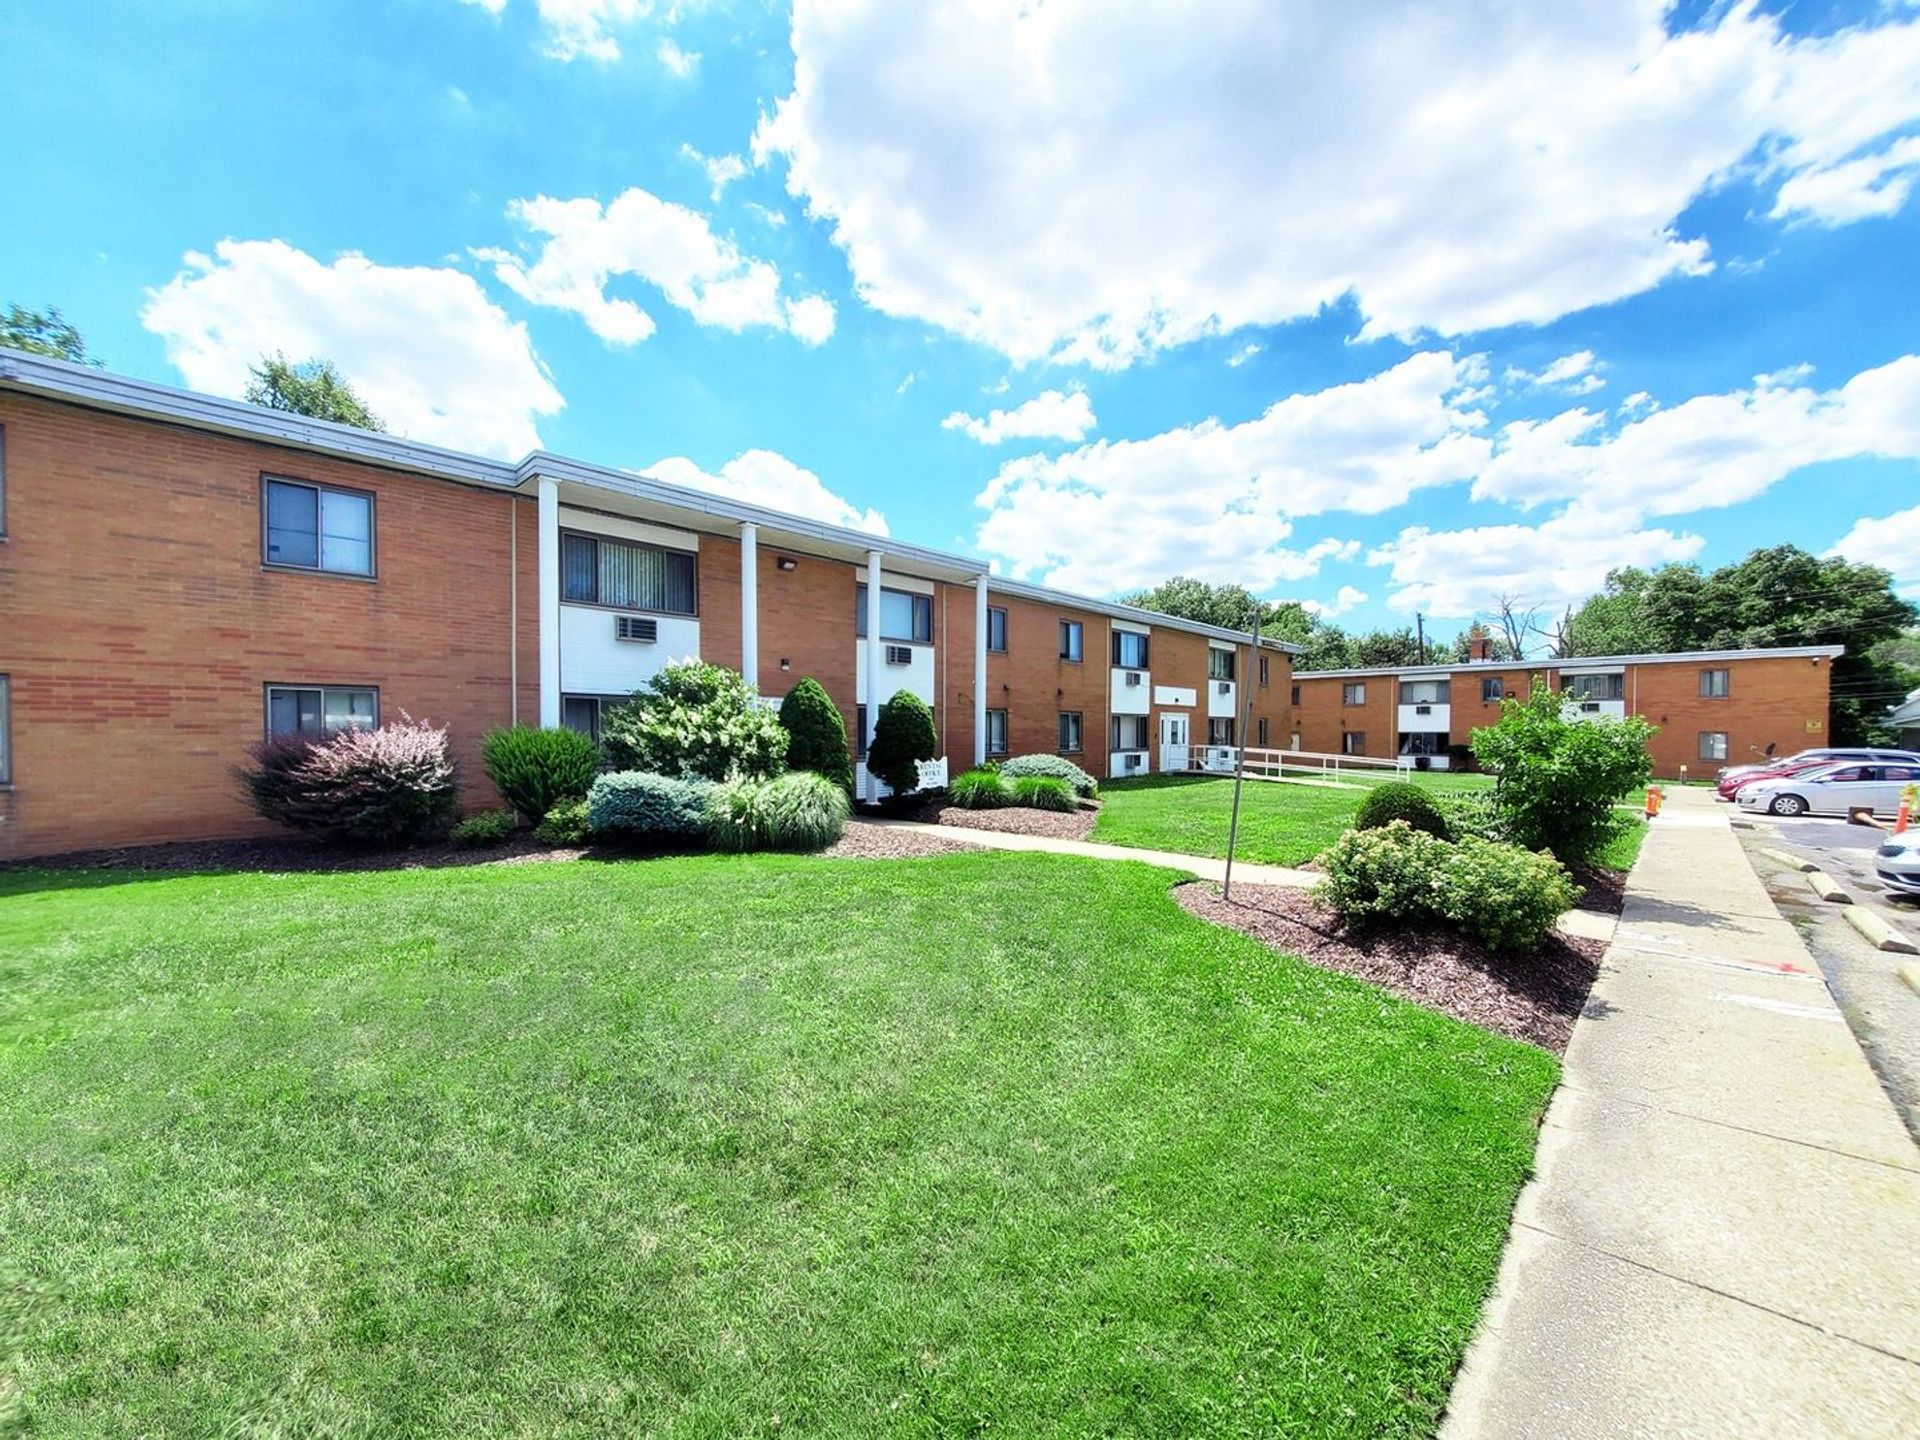 1 & 2 Bedroom Apartments for Rent | Garfield Heights | Ohio #44105 Image